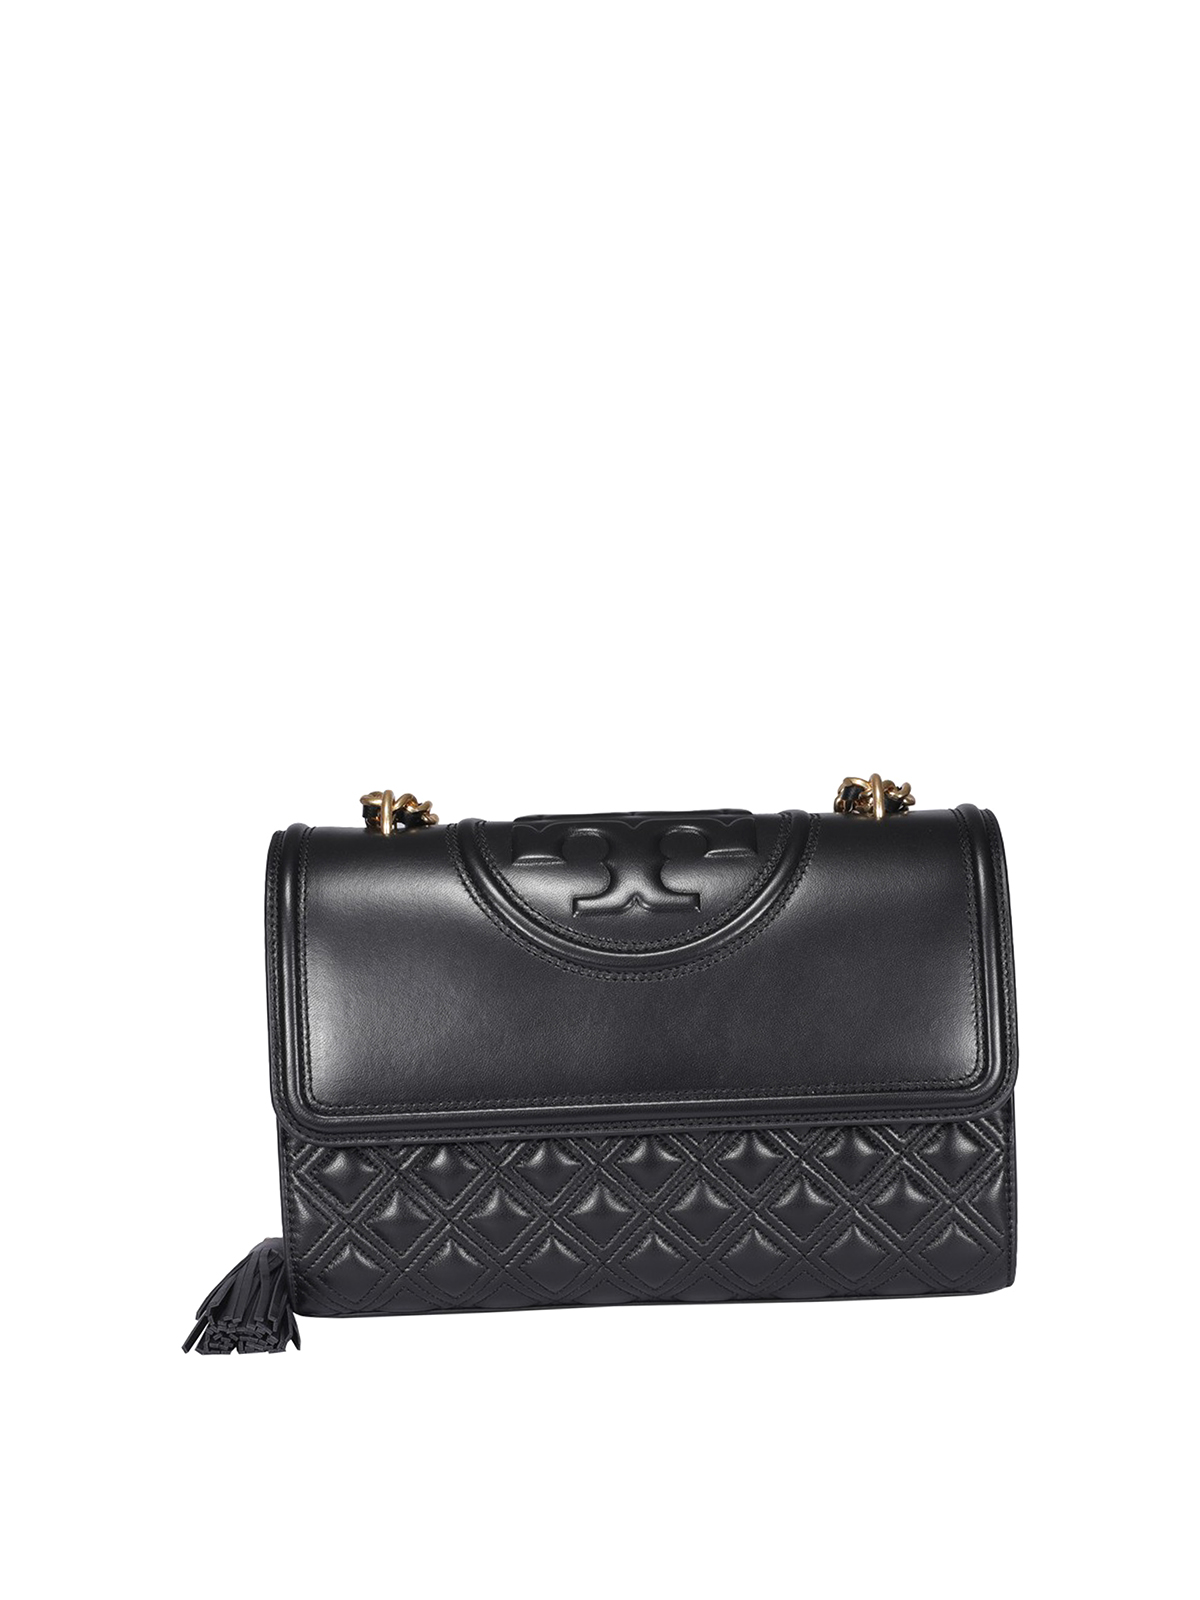 Tory Burch Fleming Quilted Leather Bag In Black